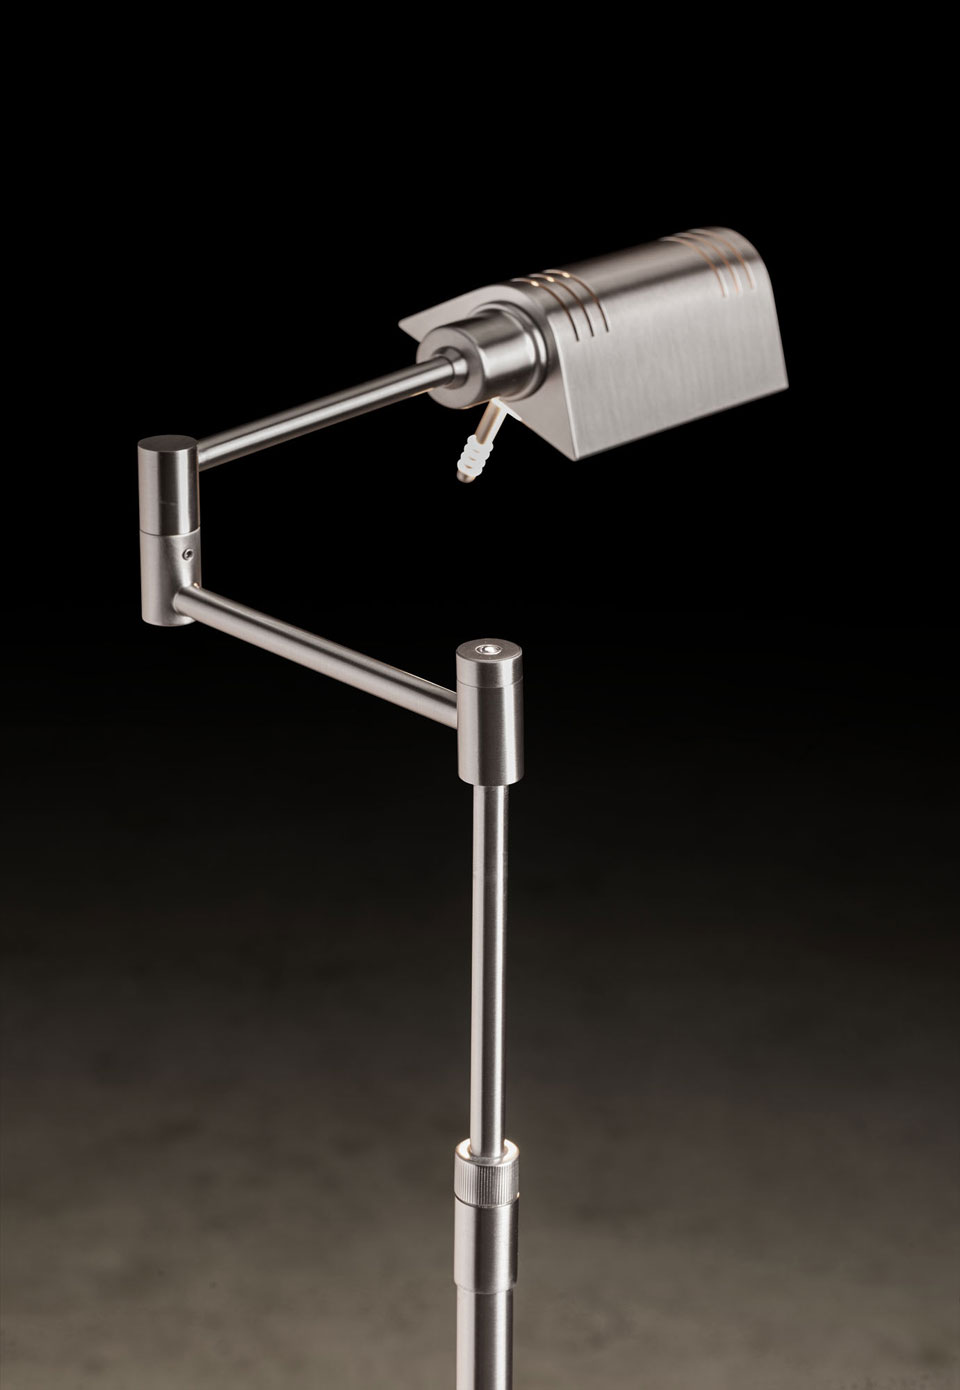 Reading lamp with double articulated arm, satin nickel LED lighting. Holtkötter. 